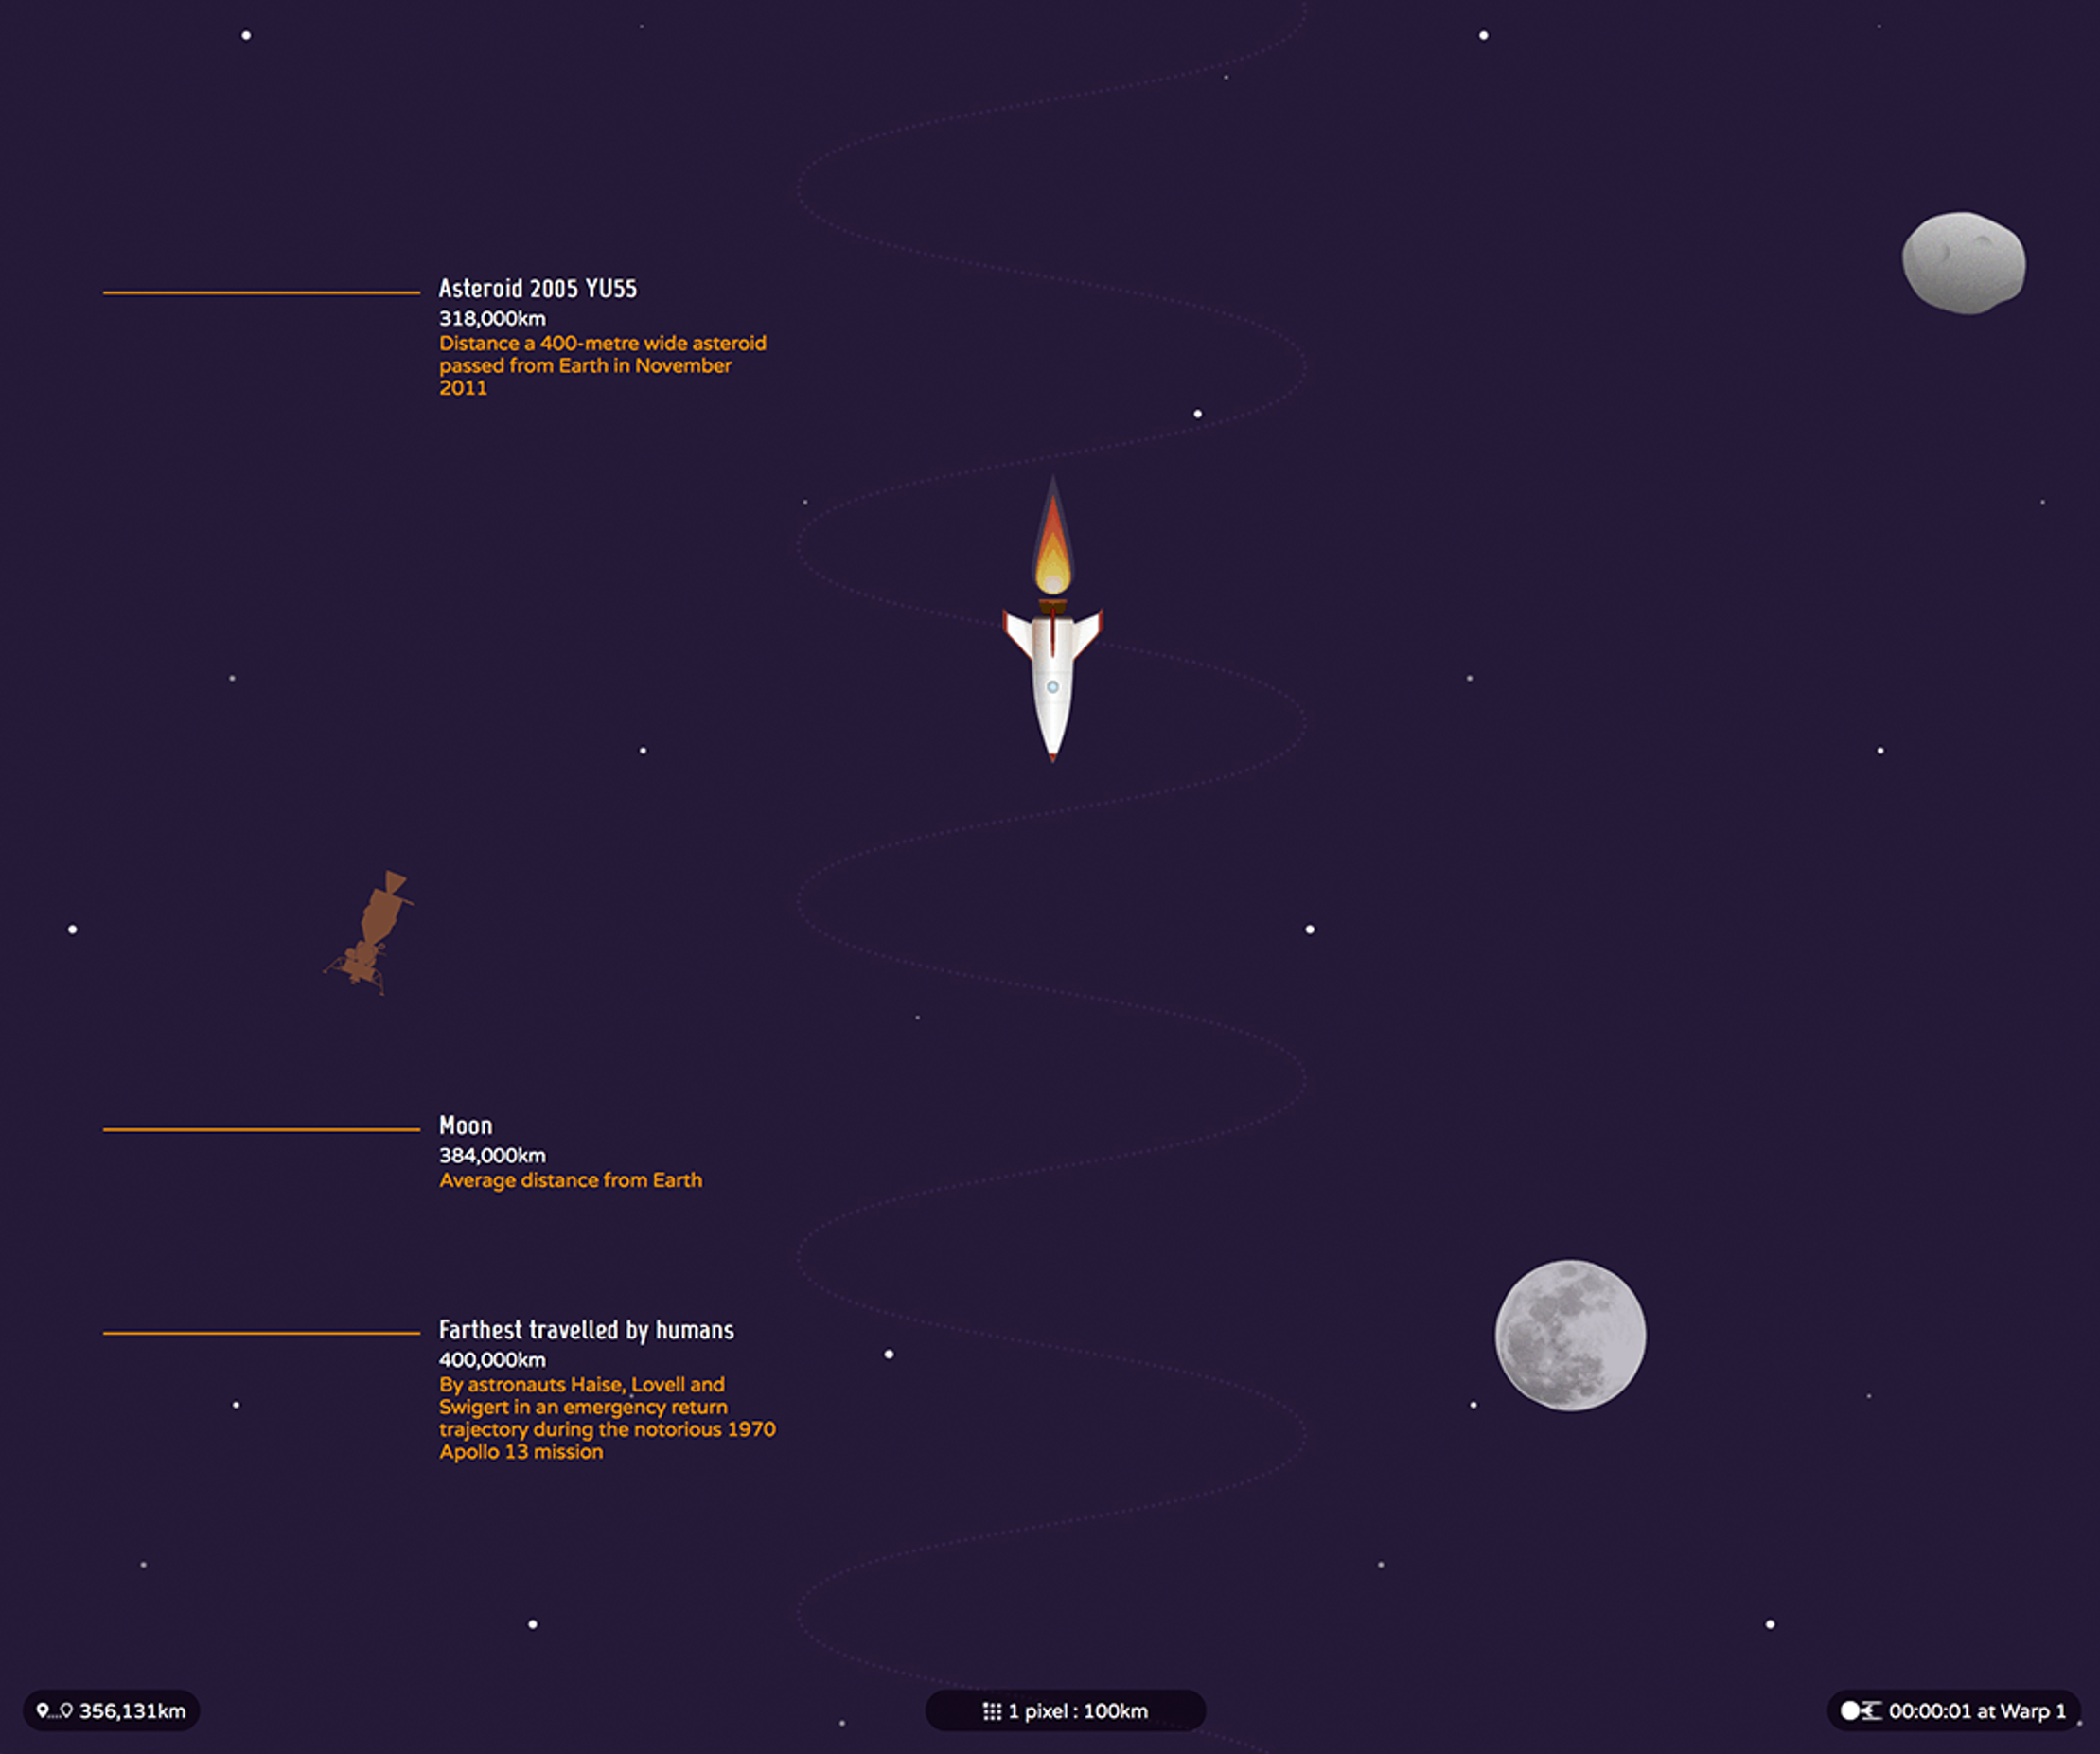 An image from the Space Race fantastic voyage. It shows a rocket flying down the screen. Alongside the rocket are various facts about different distances of objects and records in space